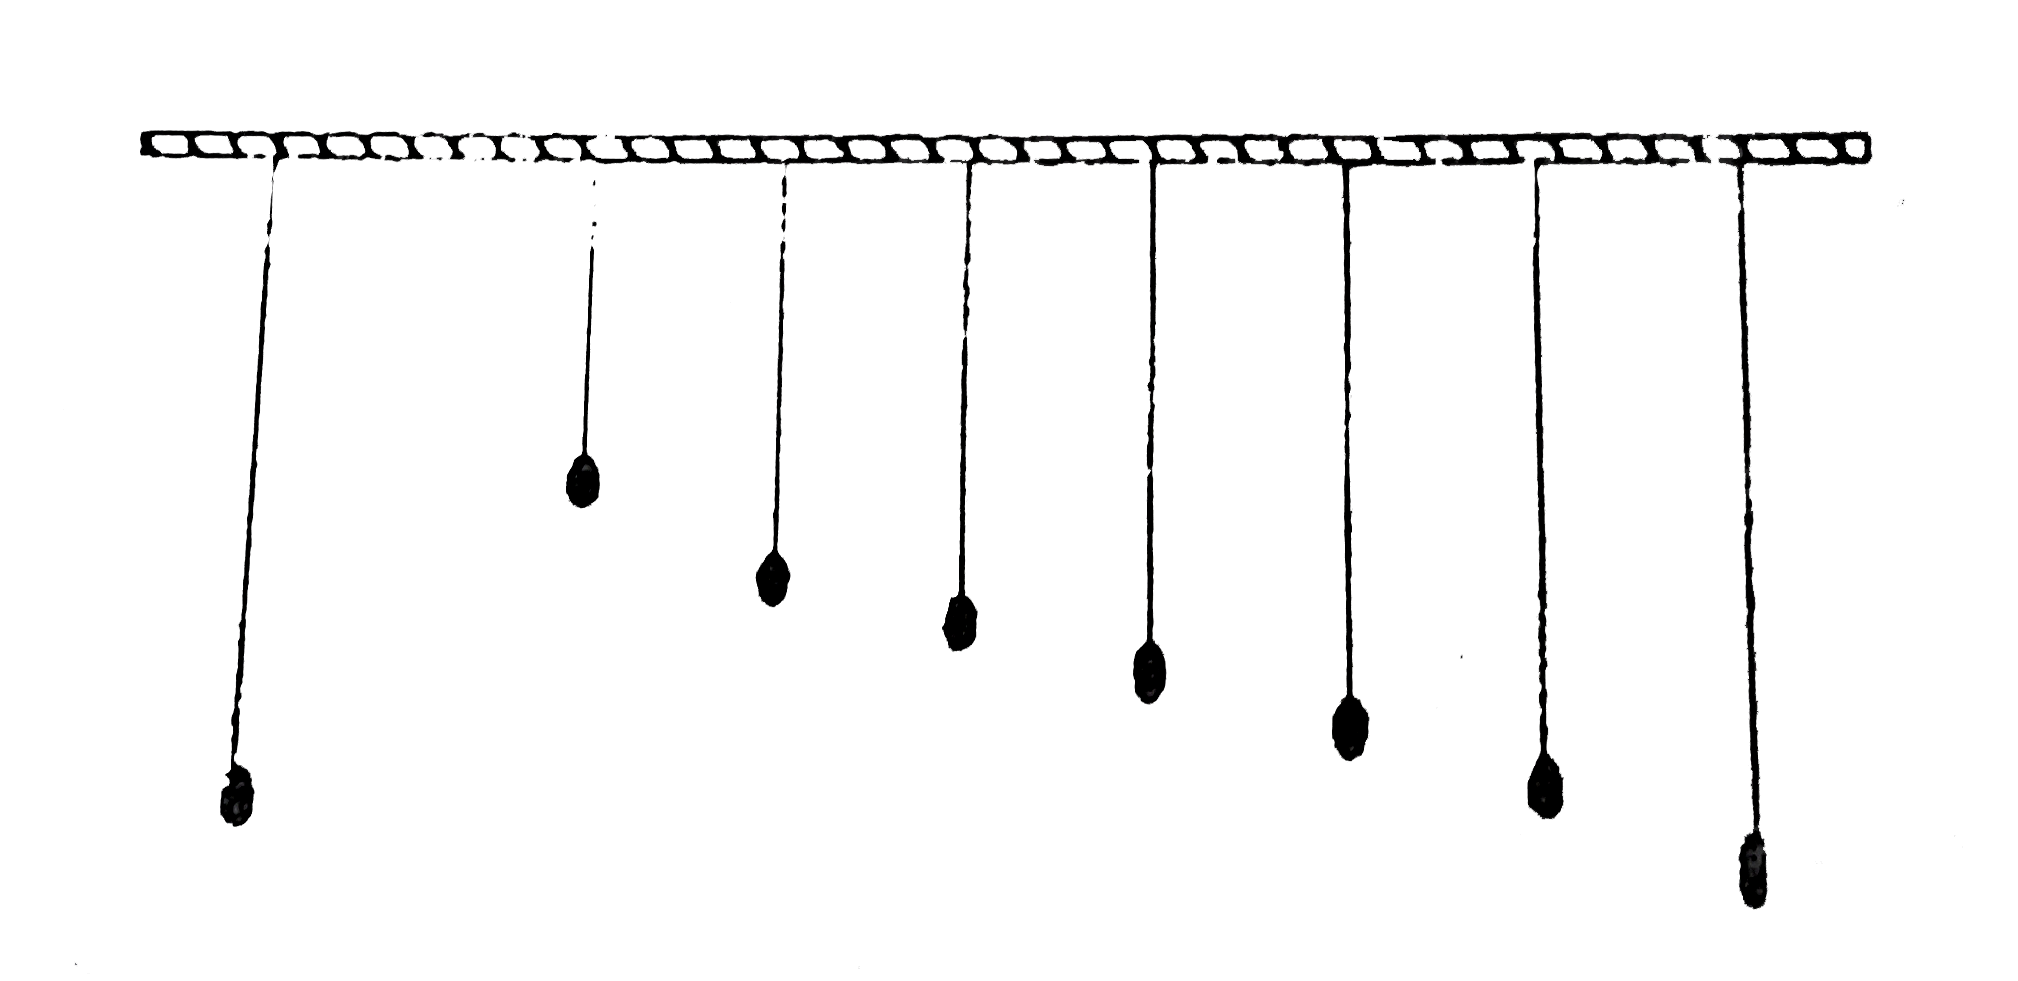 A large number of pendulums with identical bobs (mass m) but varying lengths are suspended from a thick thread. Another pendulum of a heavier bob (mass M) is also suspended from the same thred as shown.      This pendulum with the heavier bob is used as a 'driver' to drive the other pendulums called as 'driven' pendulums. Assume that the amplitude of the driver is maintained constant (by some suitable mechanism). Let the frequency of the driver be f(0)    A simple pendulum of length L has a period T. If length is changed by Delta L, the change in period Delta T is proportional to